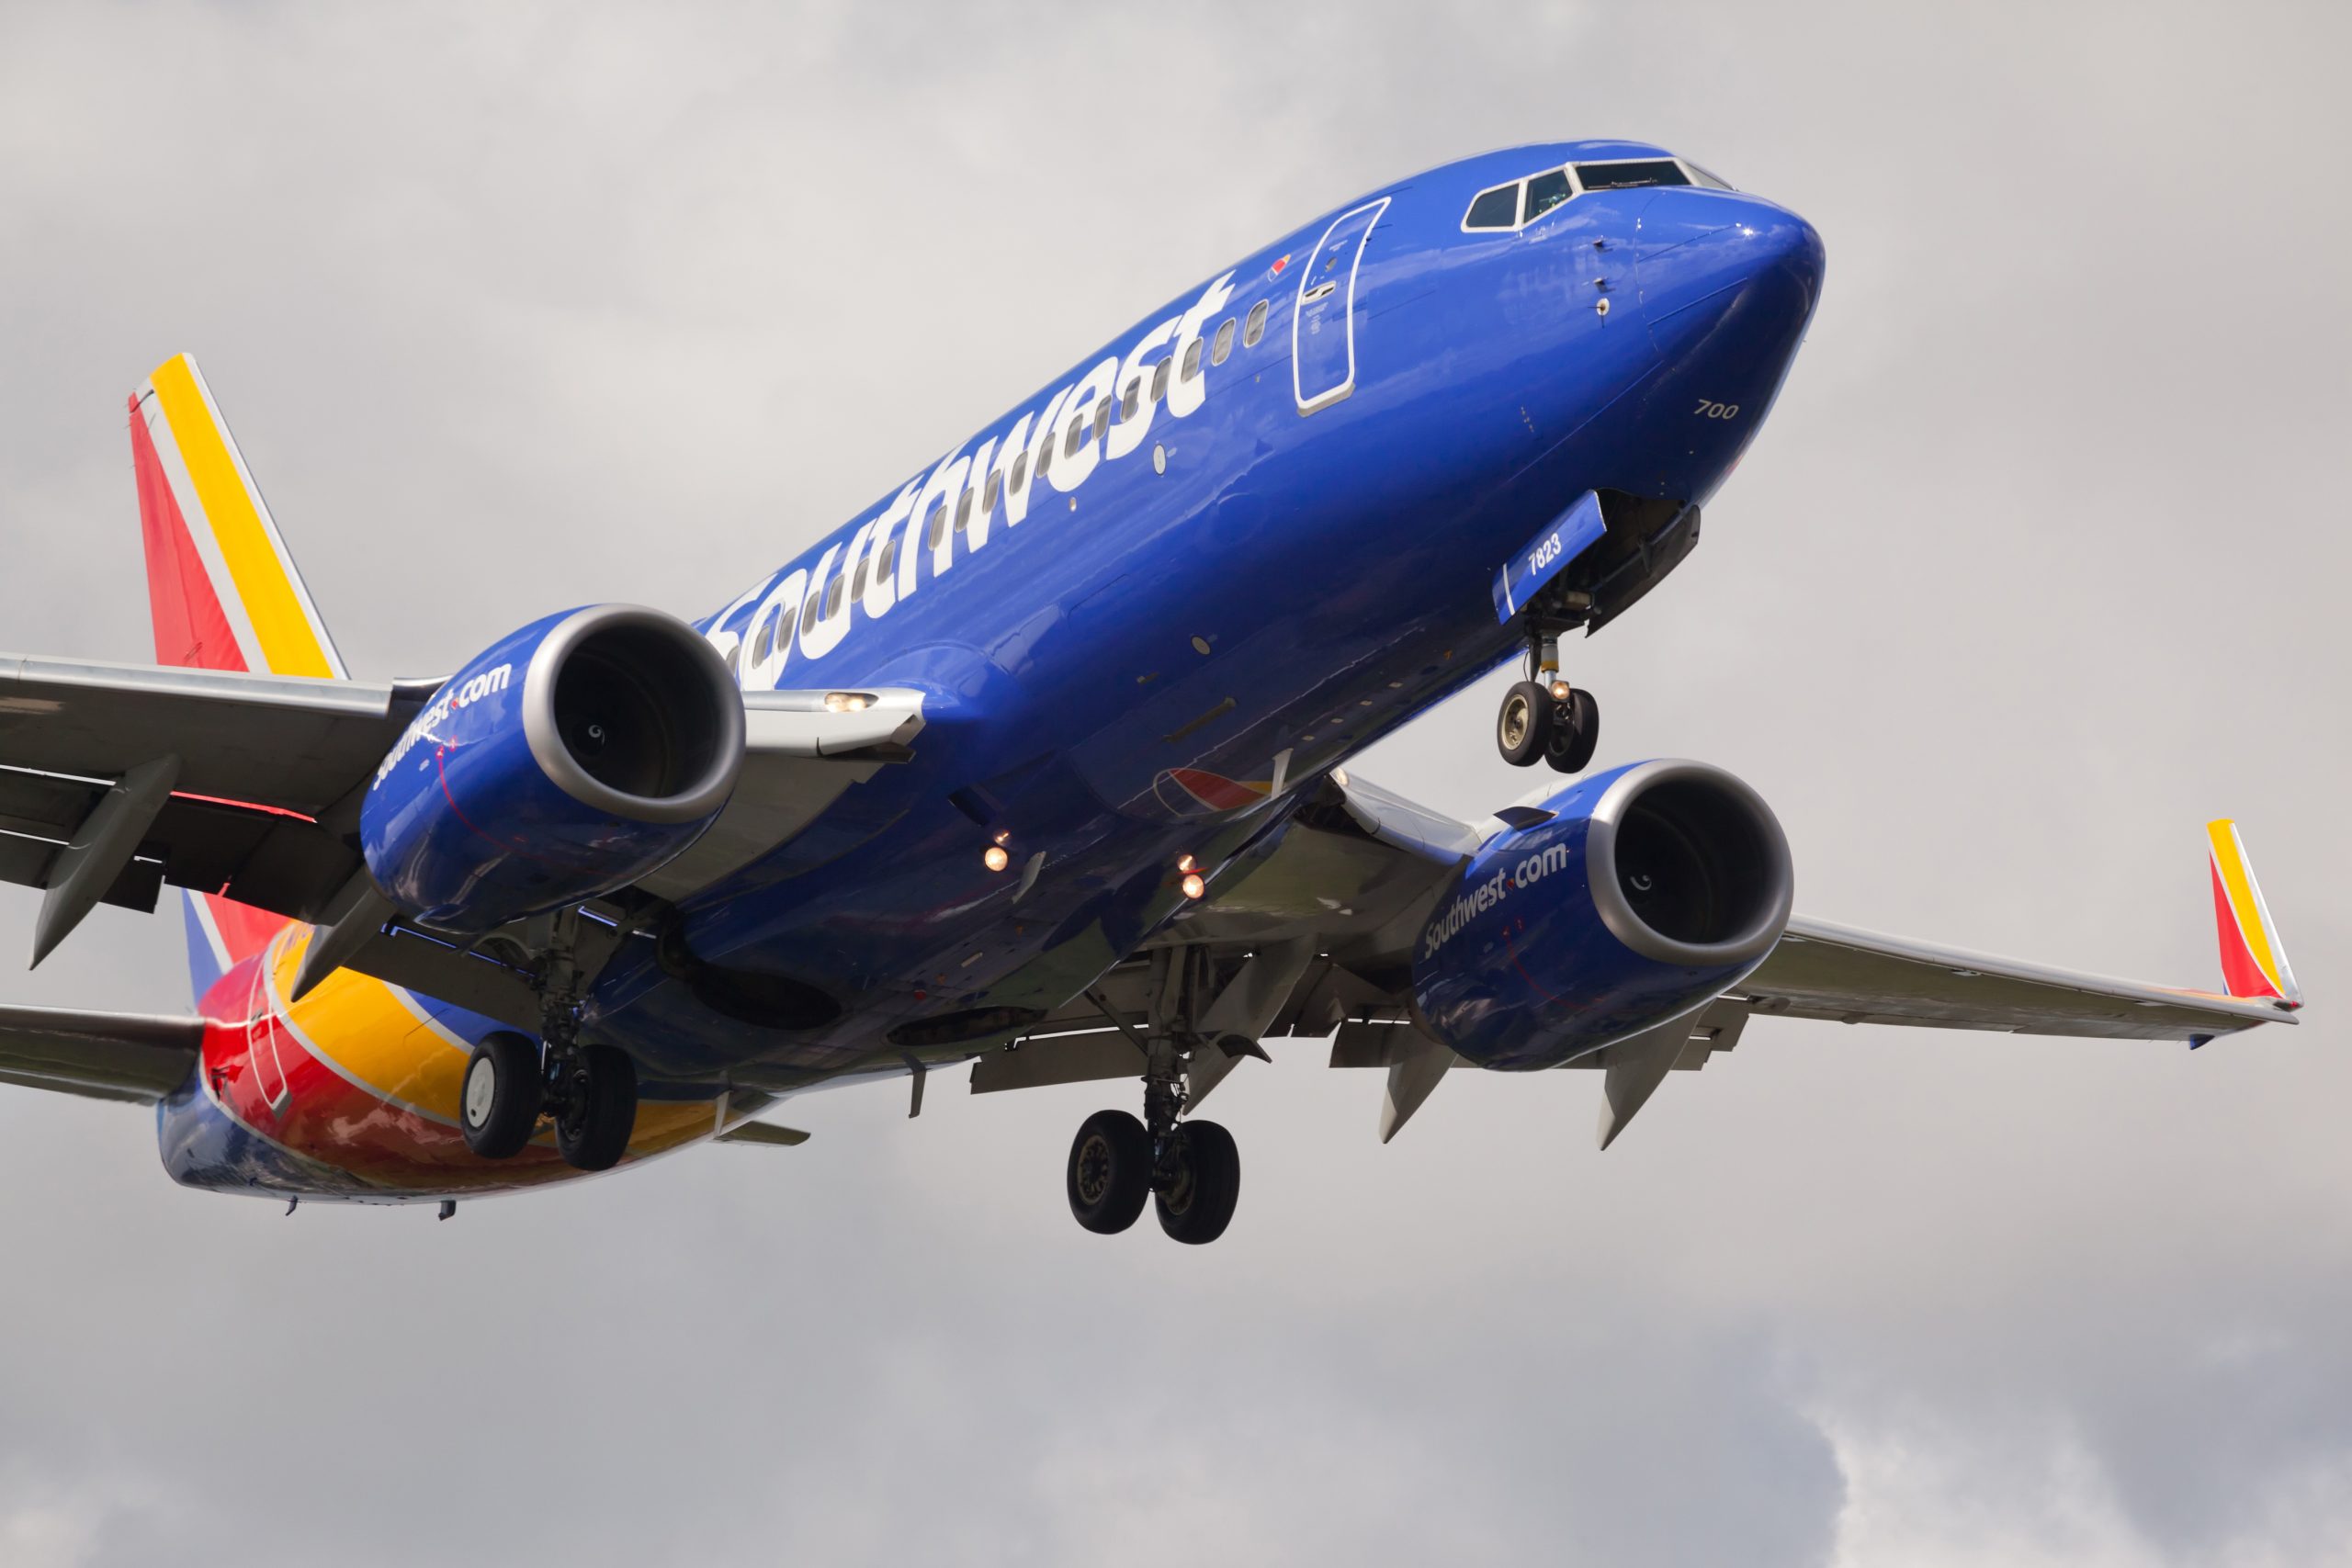 Southwest Confirms it Has Opened an Investigation Into Controversial ‘Let’s Go B..